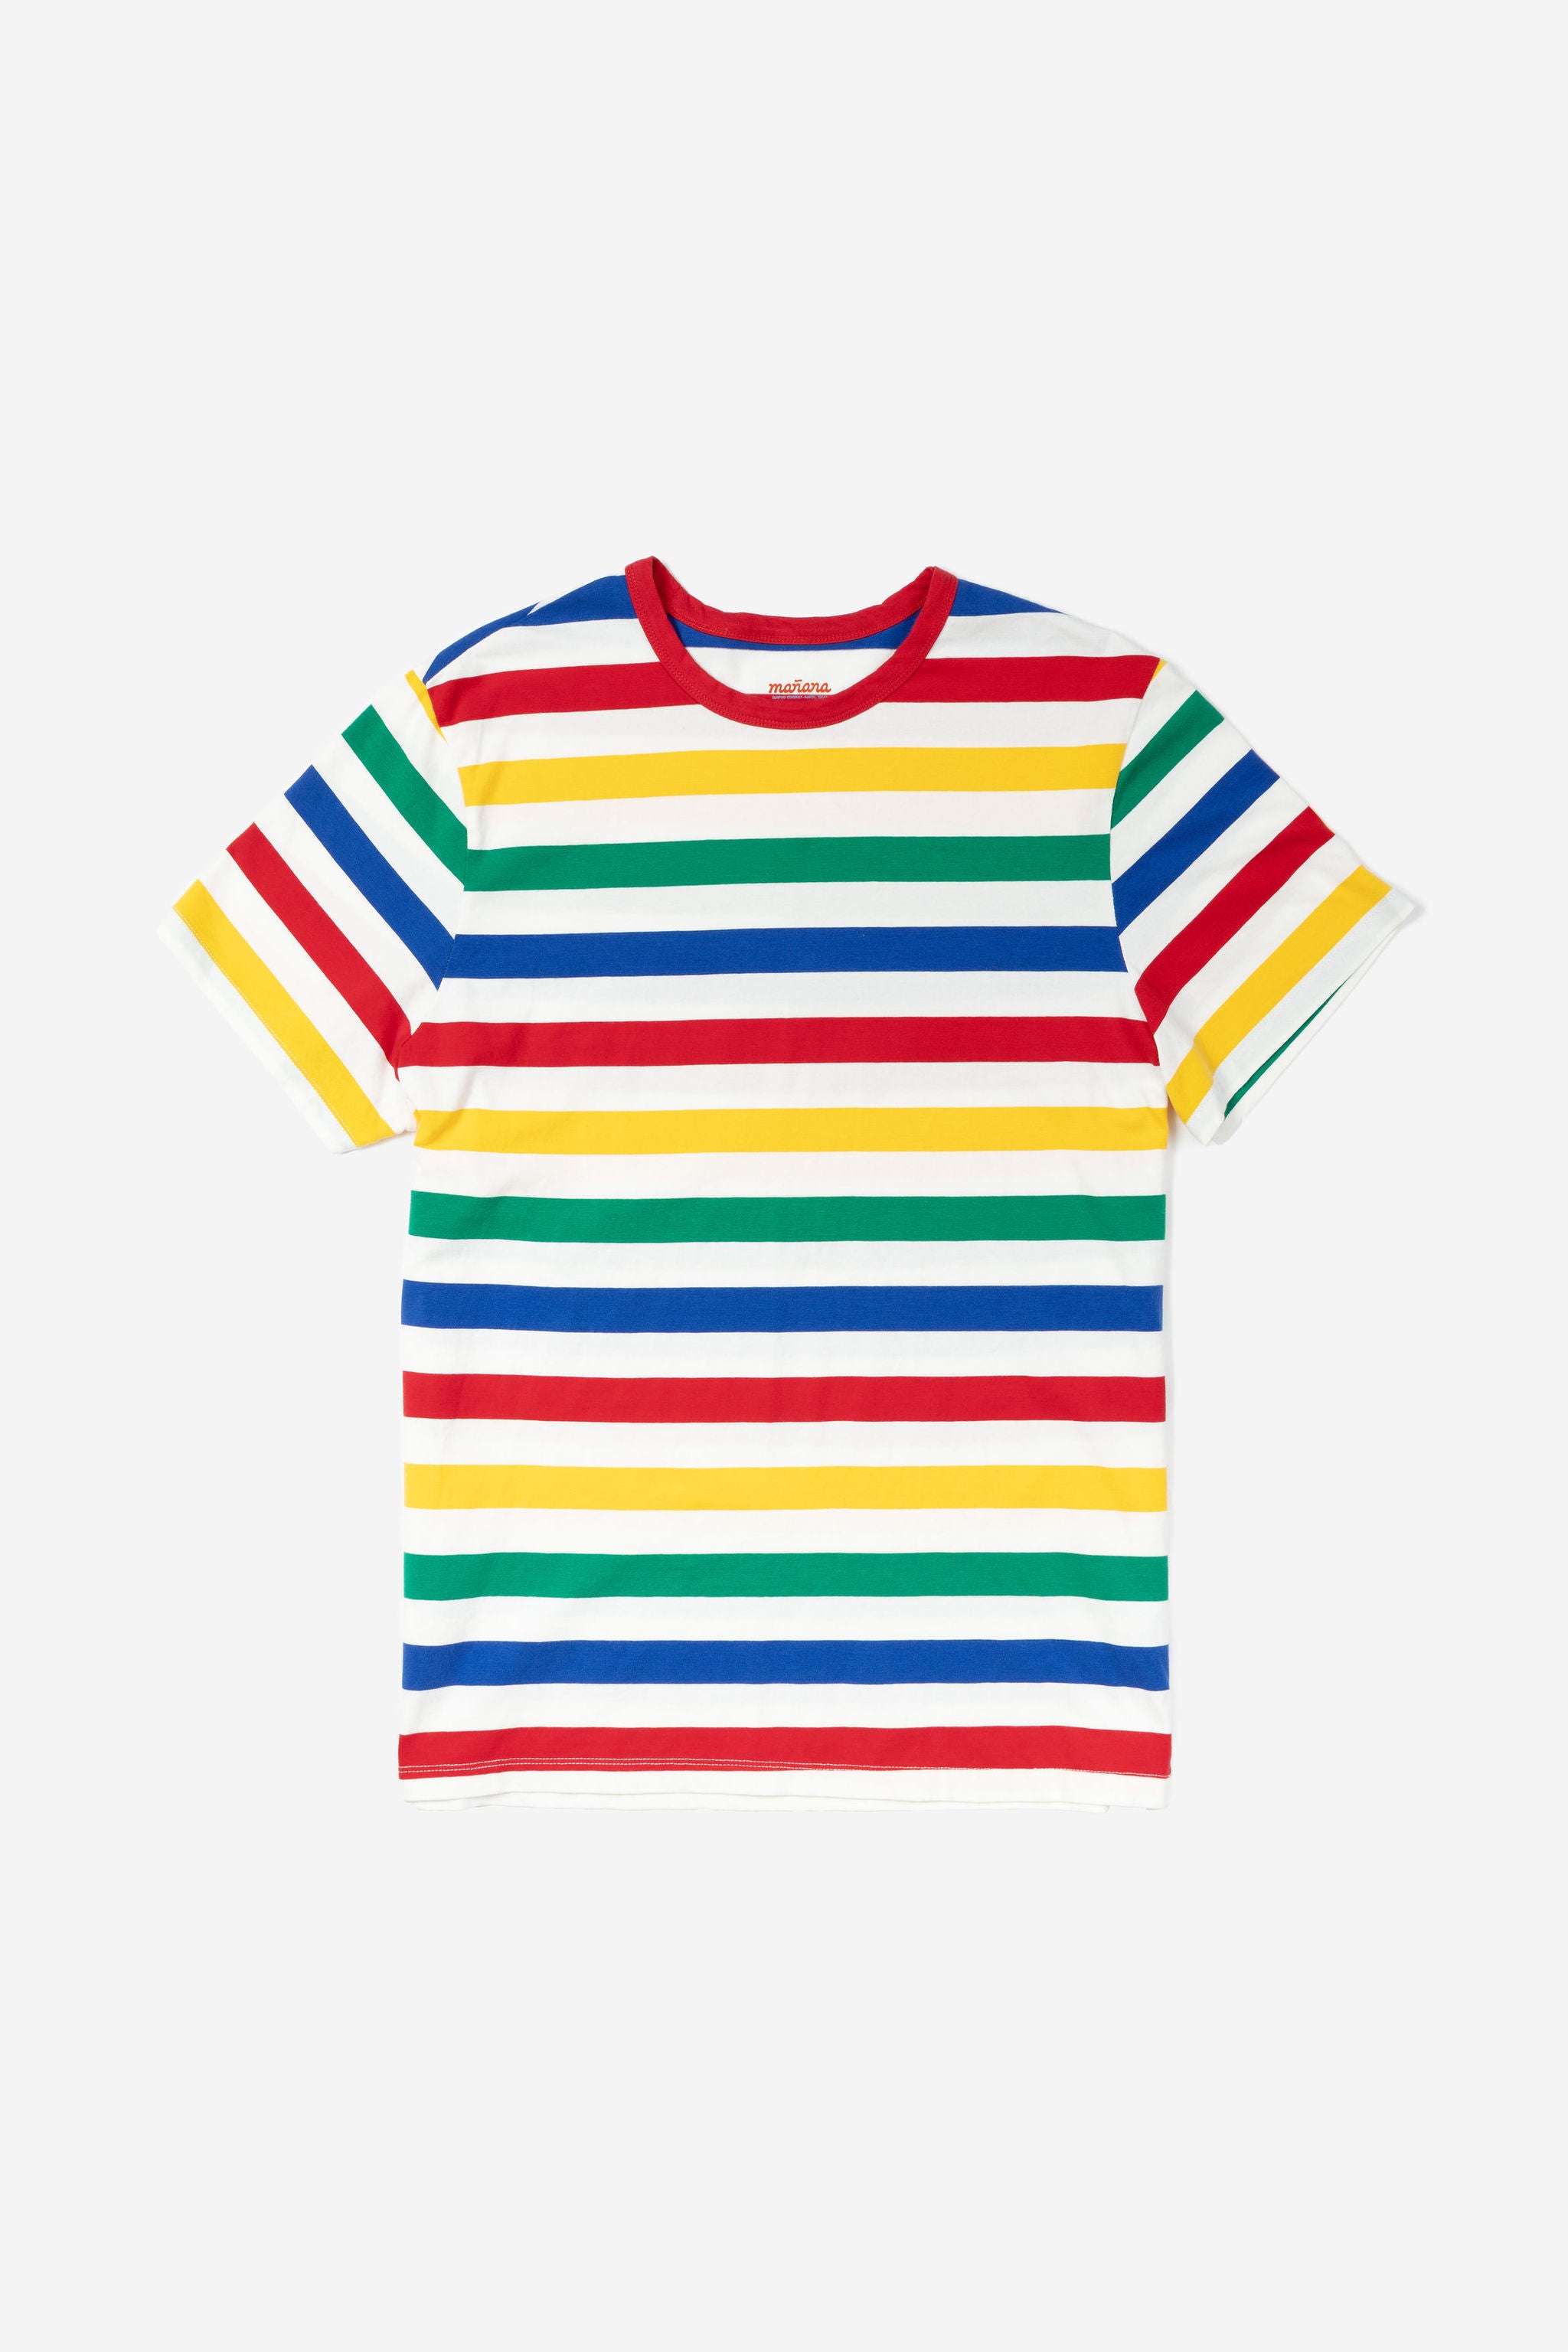 Premium Vector  Vector of a colorful rainbow striped t shirt